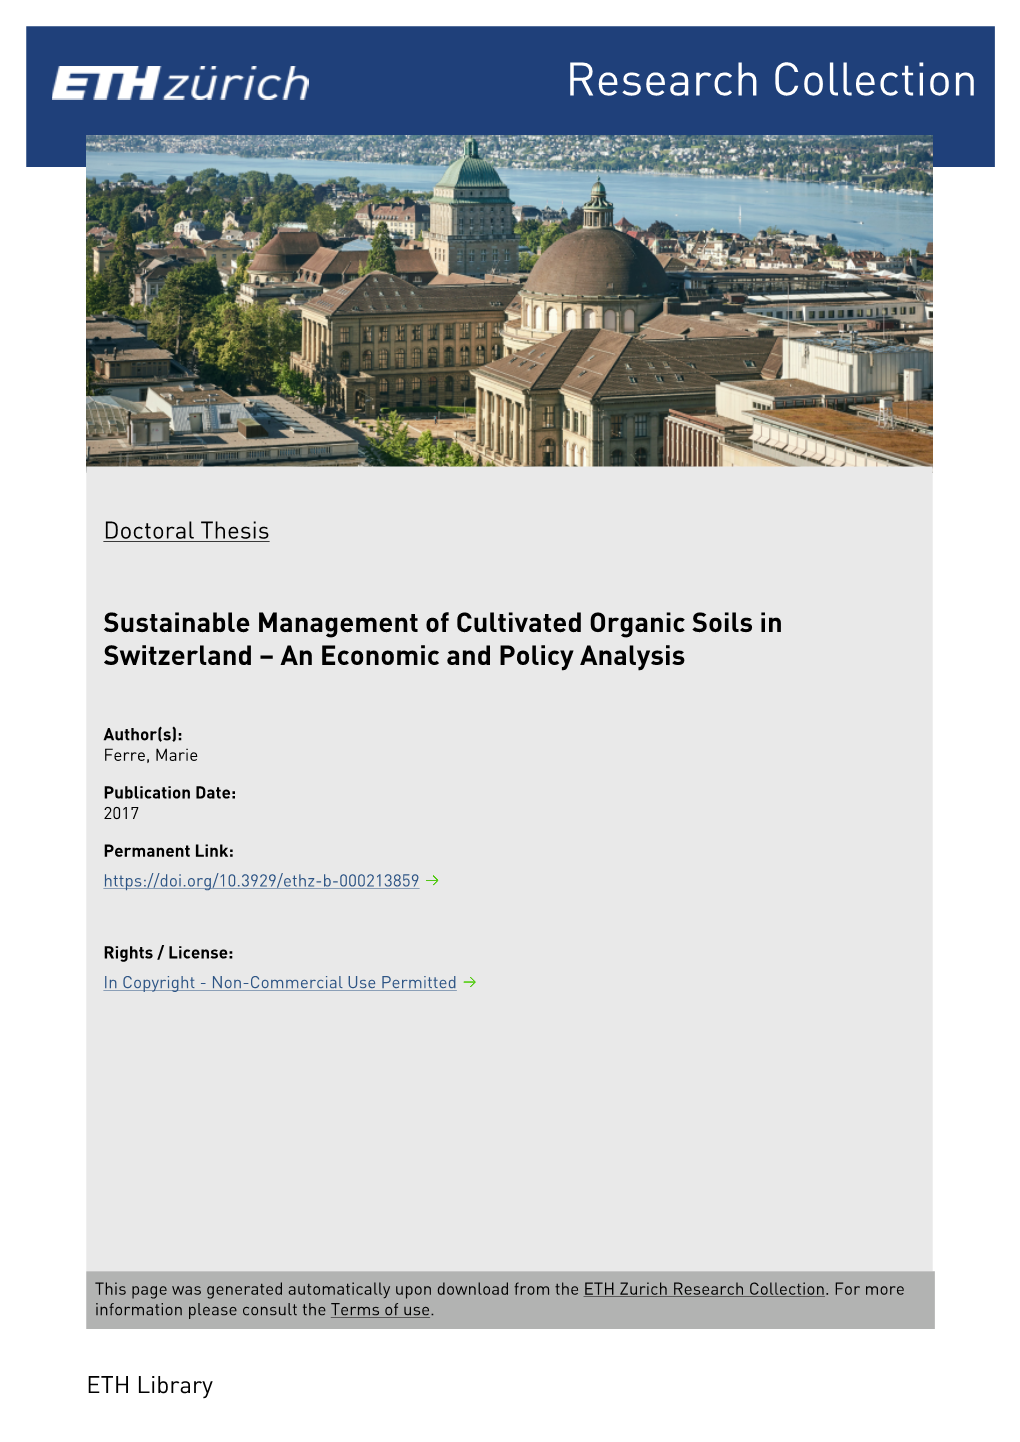 Sustainable Management of Cultivated Organic Soils in Switzerland – an Economic and Policy Analysis